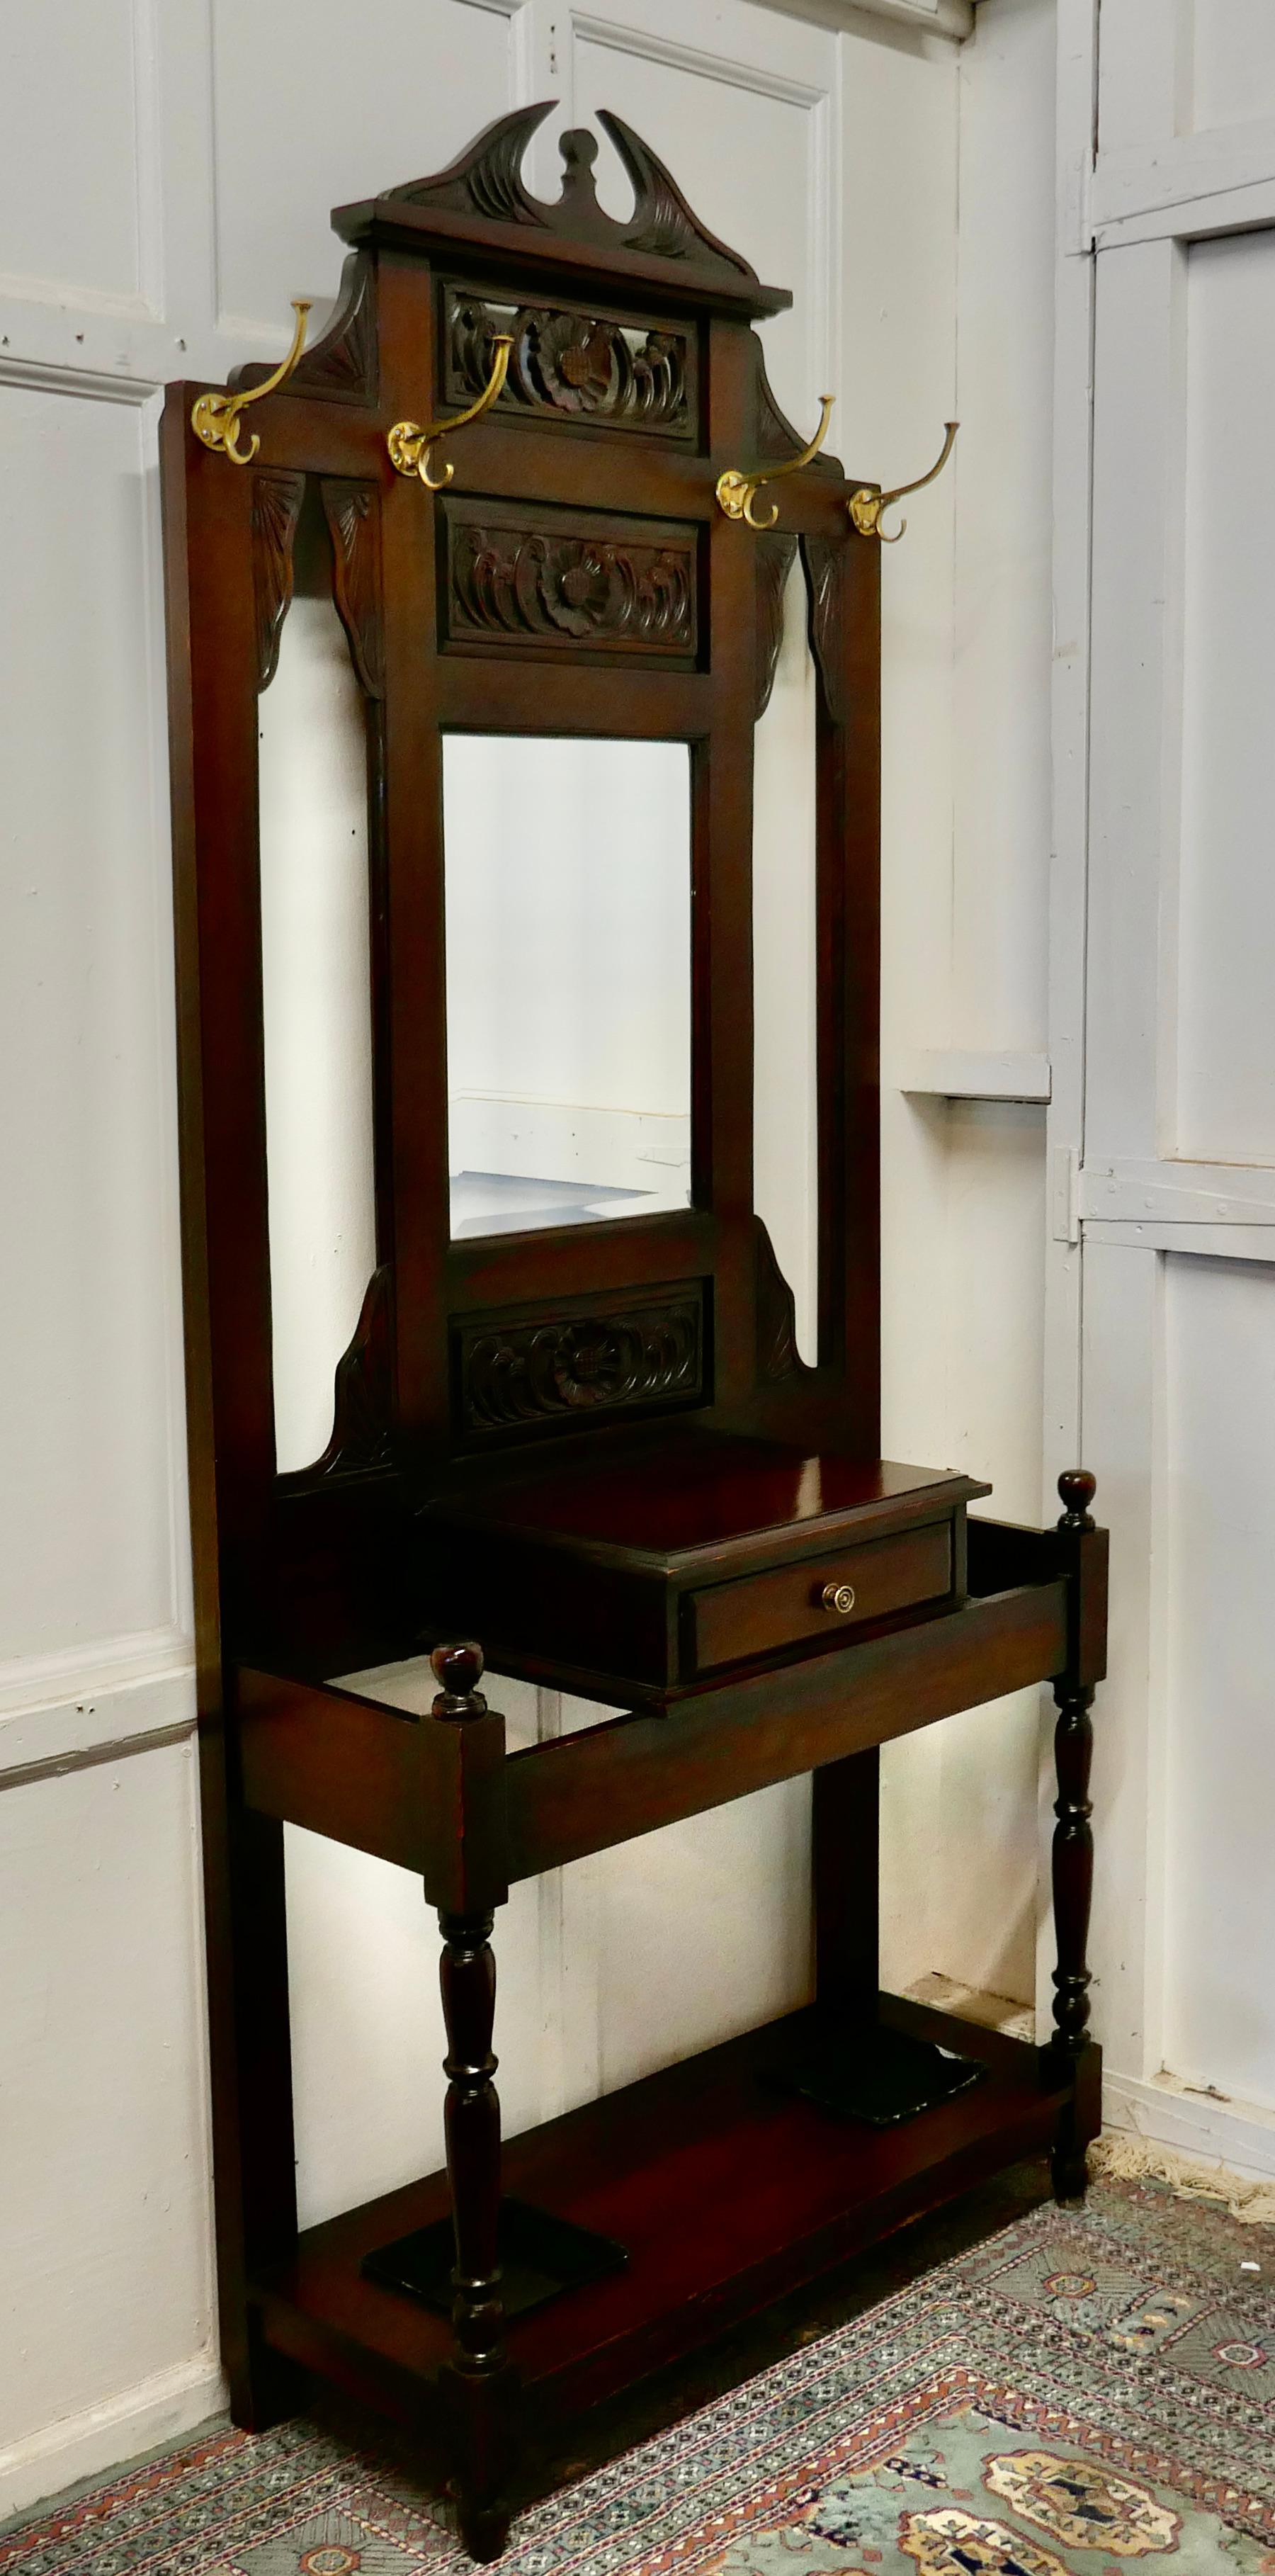 Victorian mahogany hall stand 

This is a handsome piece, the stand has an imposing Swan Neck pediment set over carved sun flowers and a central mirror.
The lower section has a lidded glove box set between the umbrella and stick stands which have